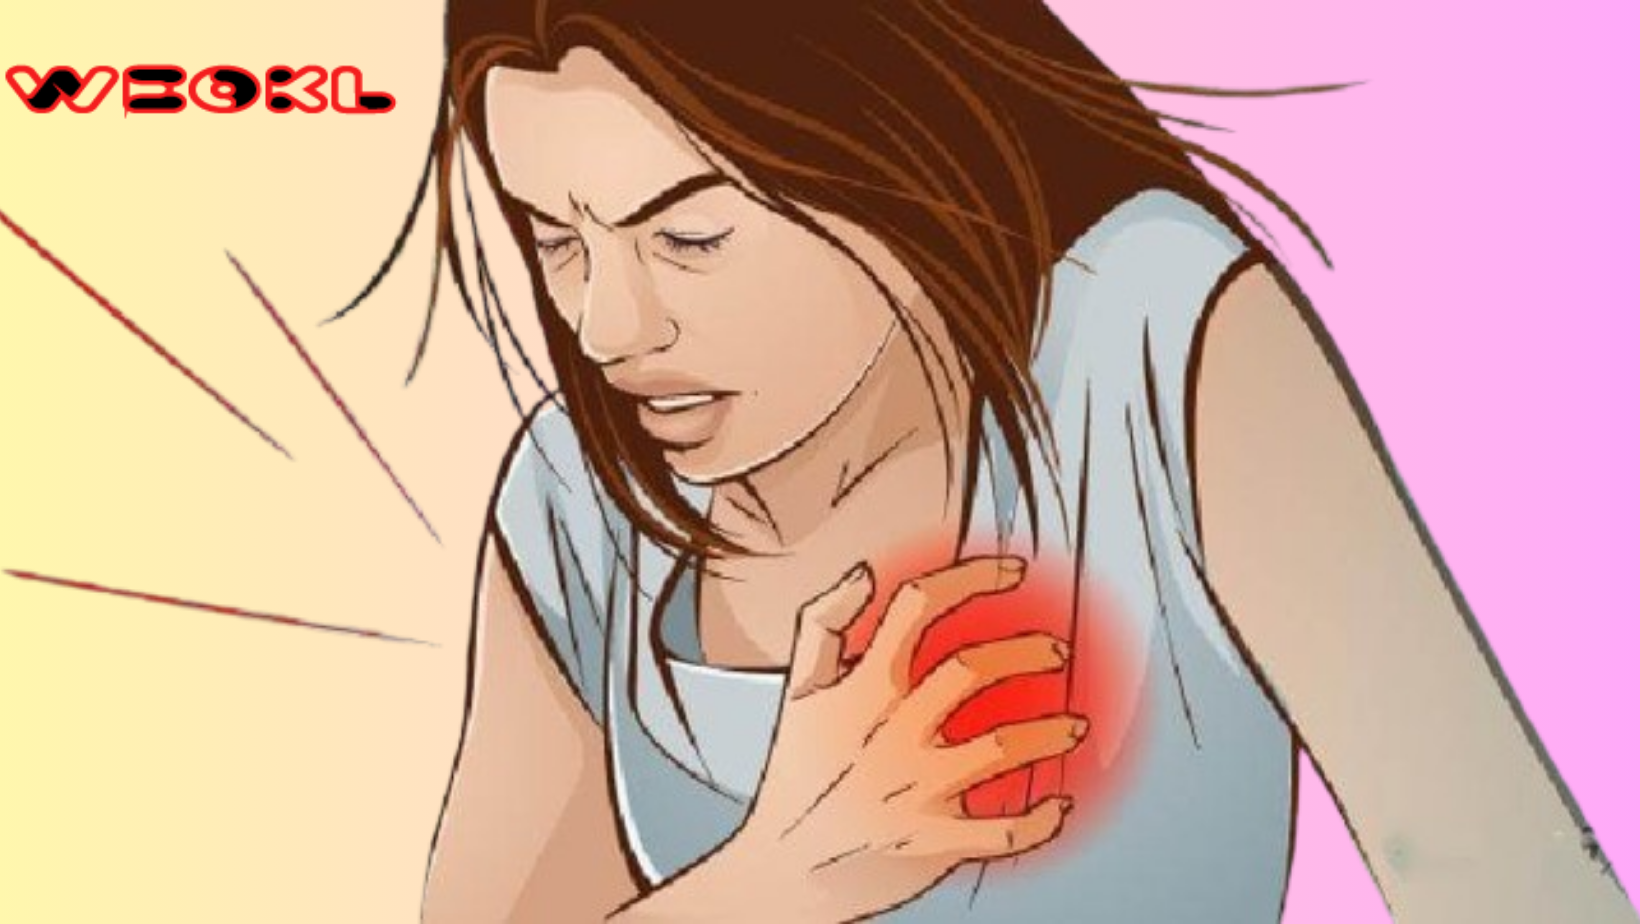 A month before you have a heart attack, your body will warn you – here are the six signs